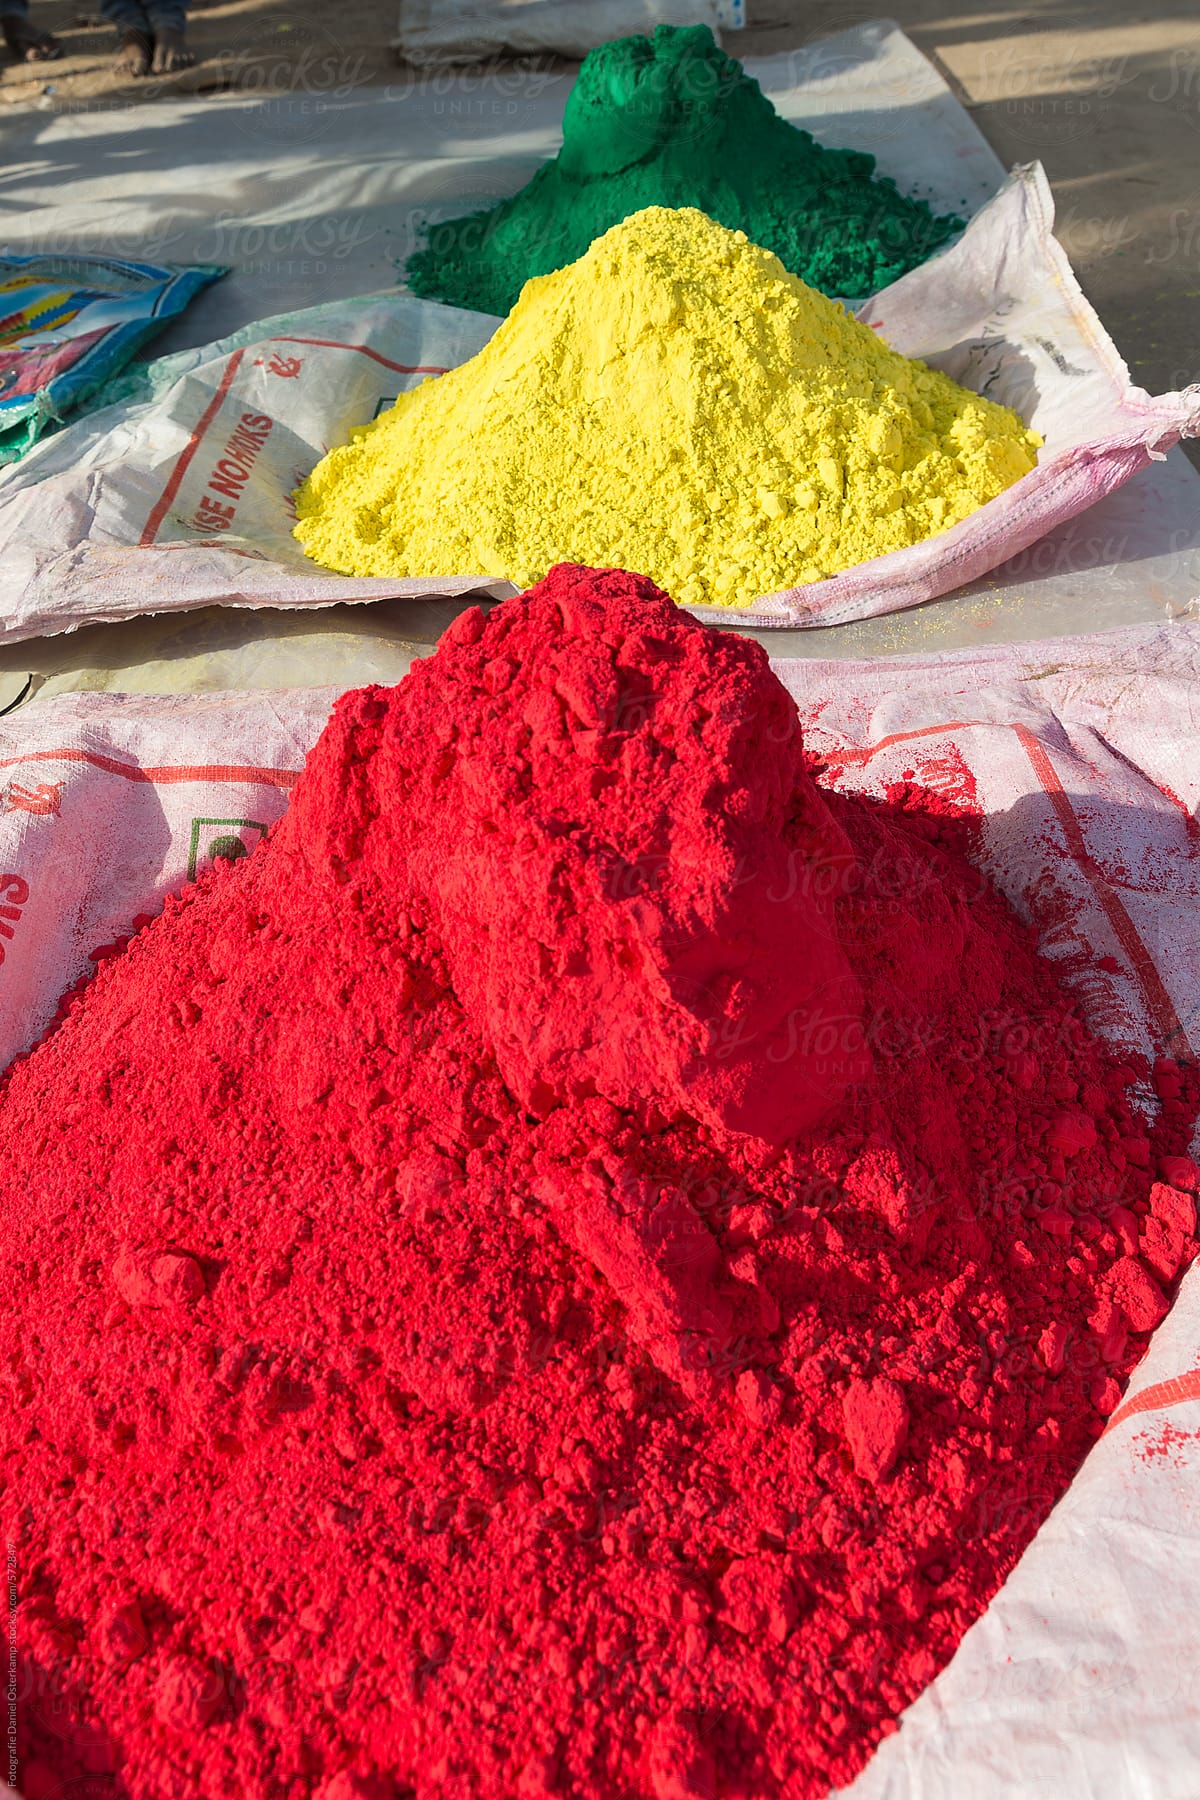 Red Yellow and Green Gulal Powder (Color Pigments) for Holi Festival